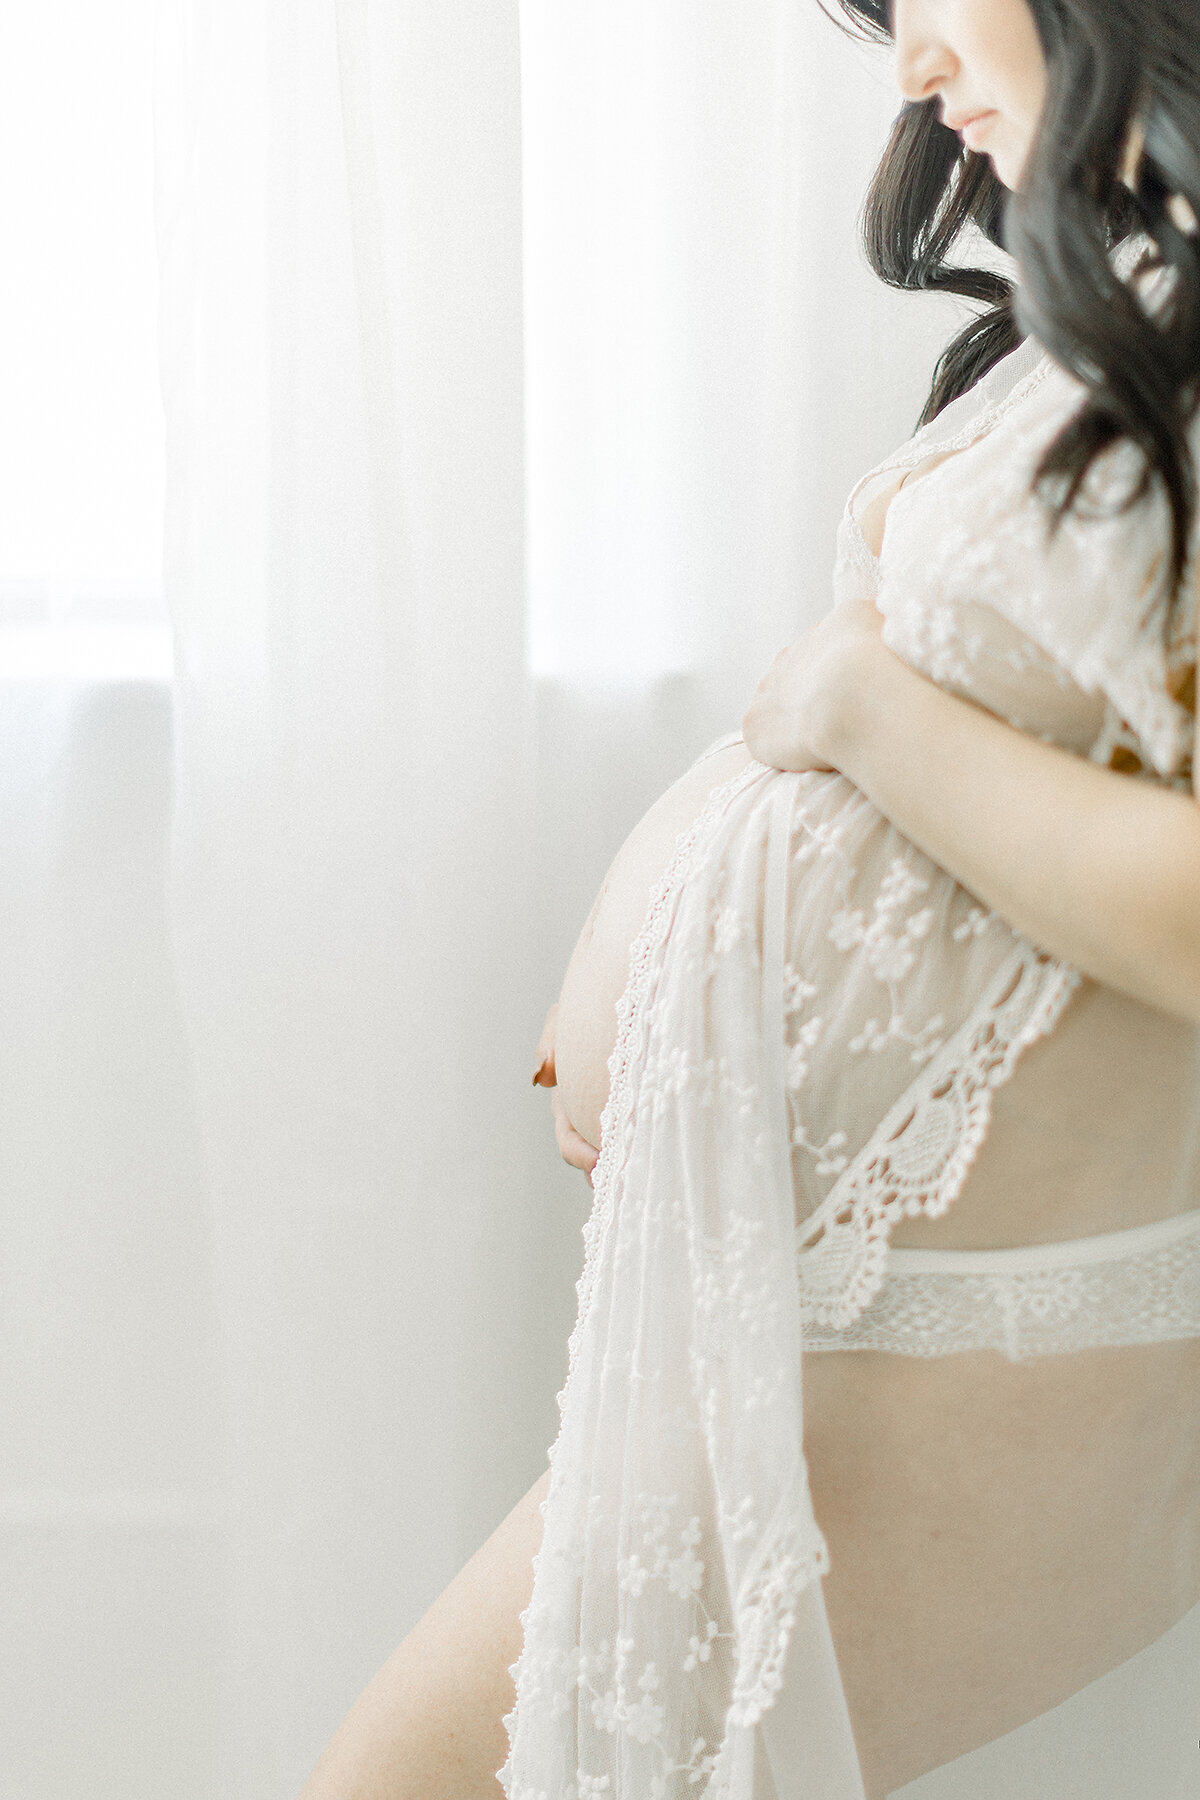 A close up side profile of an expecting mother standing by a window as being photographed by a Dallas maternity photographer in their studio.